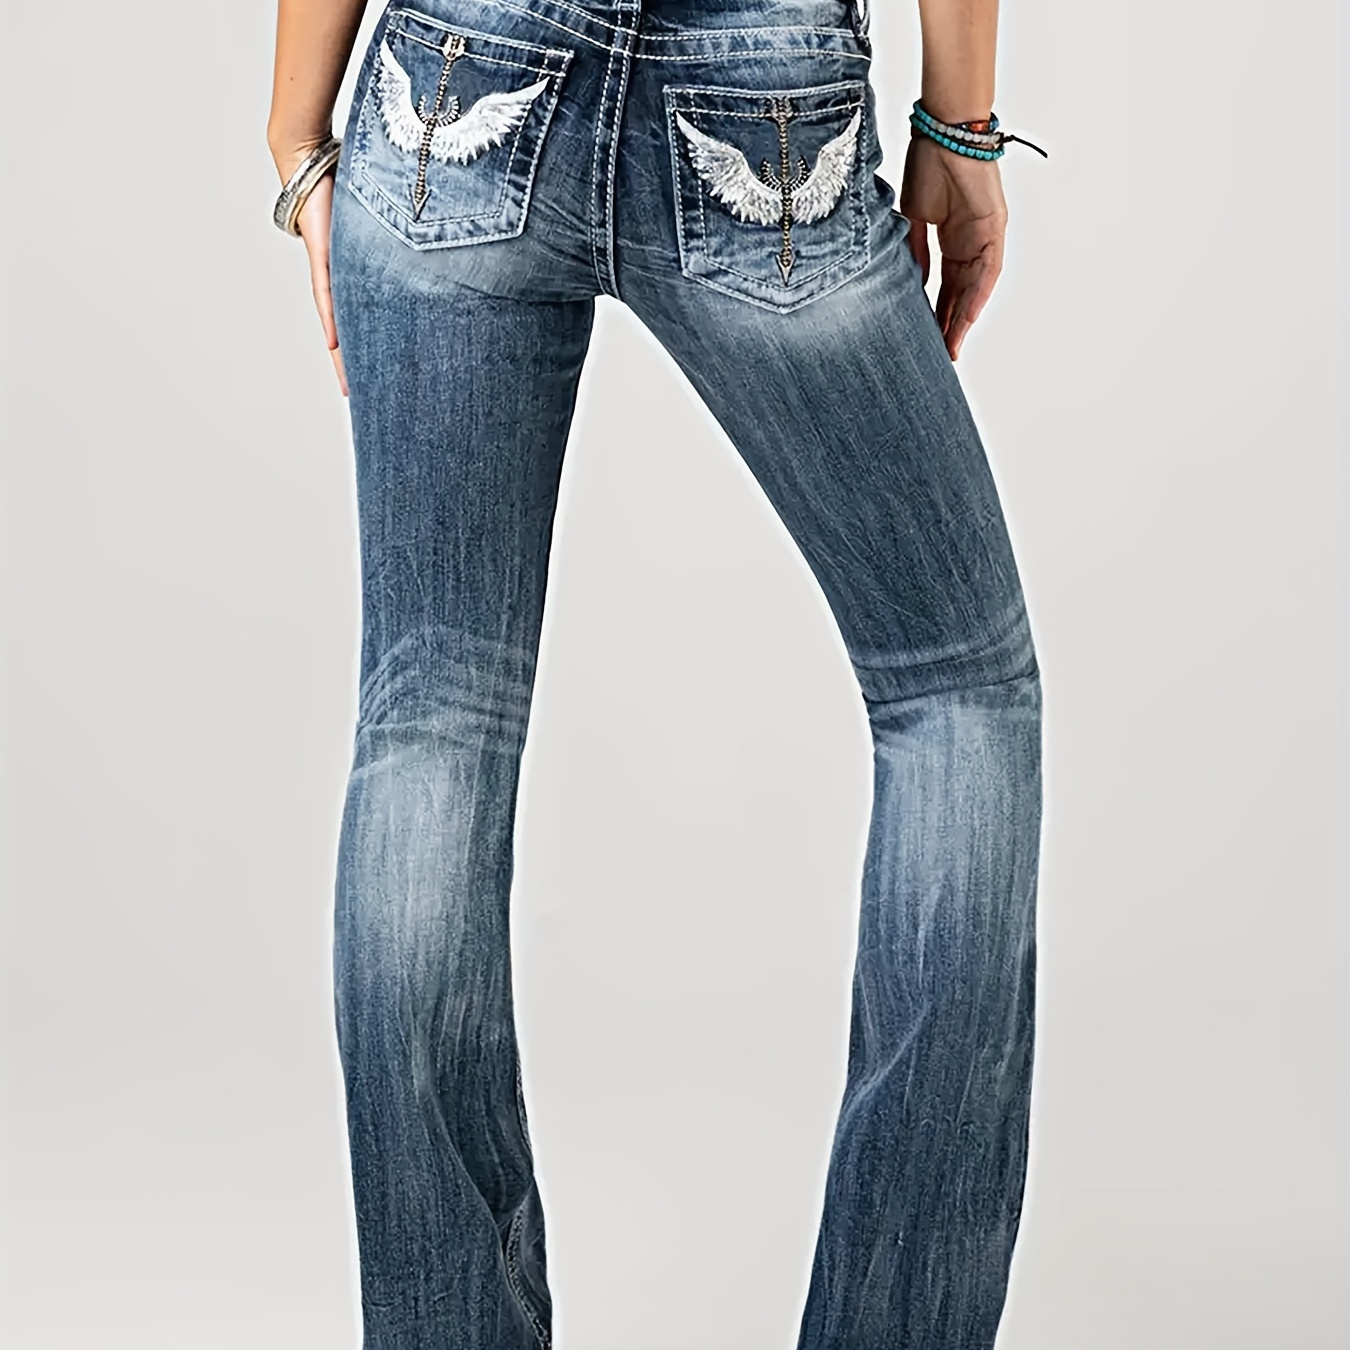 

Wing Embroidered Washed Jeans, Butt Lifting High-stretch Distressed Casual Denim Pants, Women's Denim Jeans & Clothing